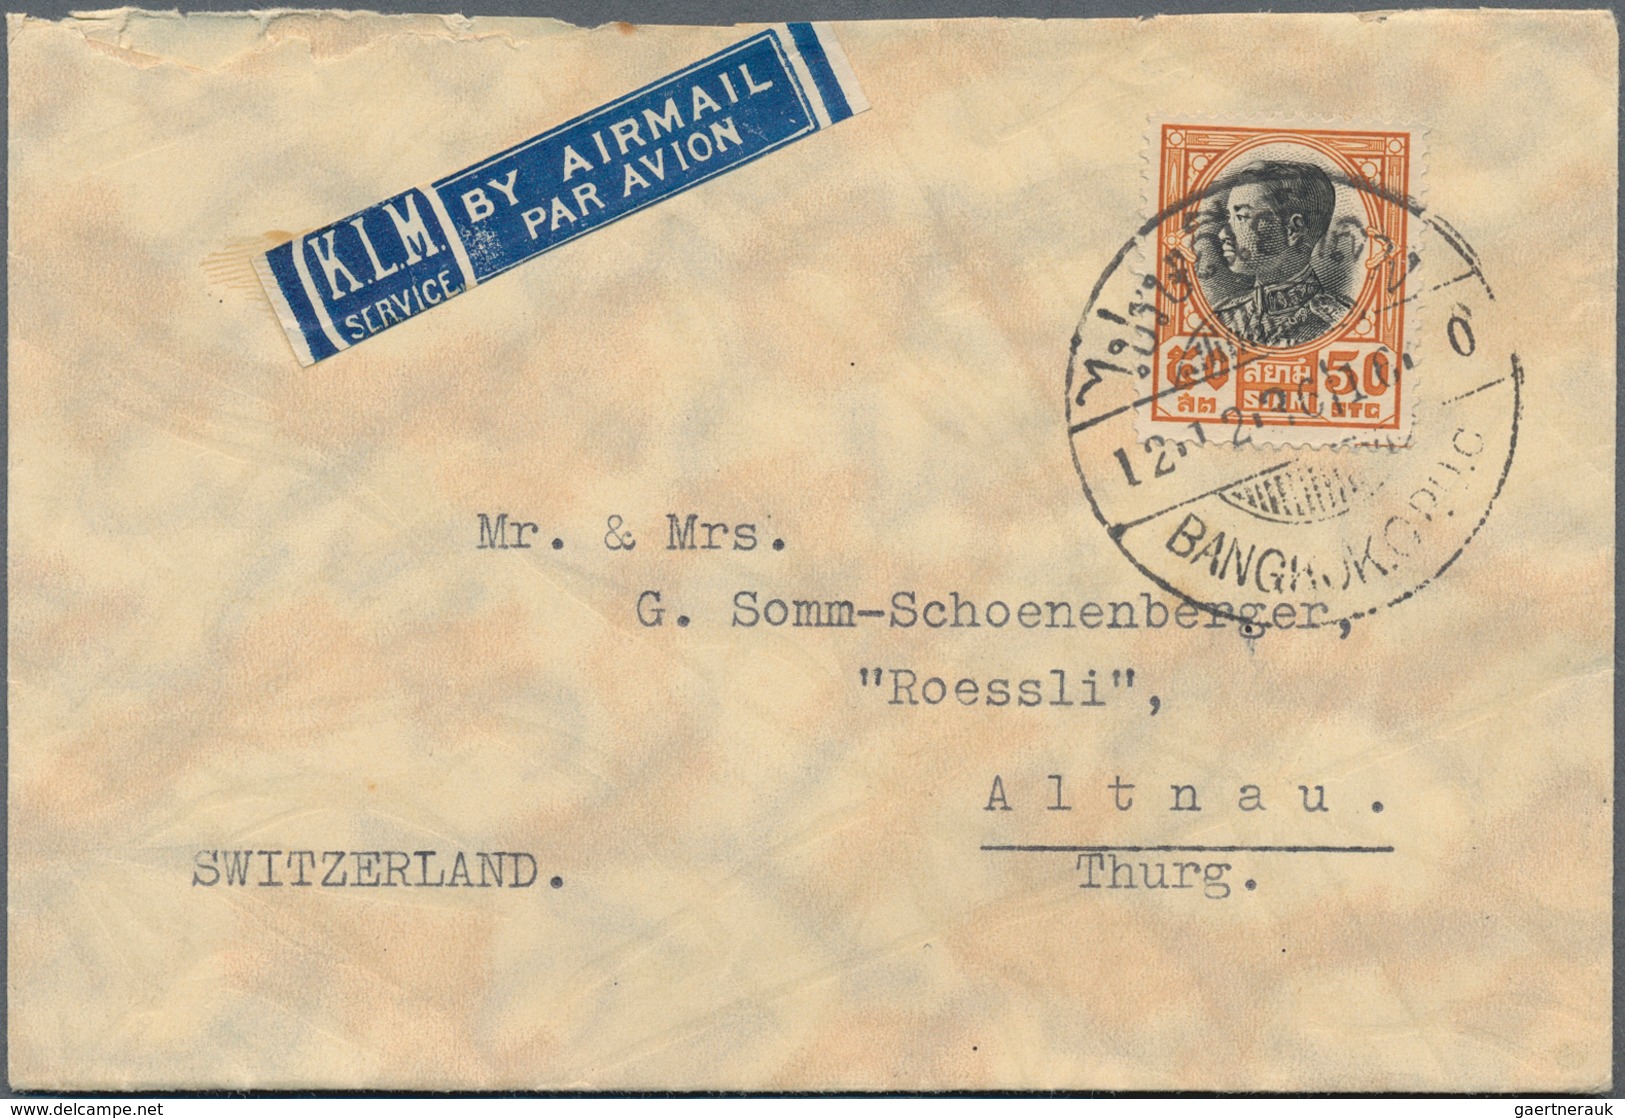 Thailand: 1936/49, 7 Airmail Covers To Holland, Germany And Switzerland Through K.L.M., Including Sp - Thailand